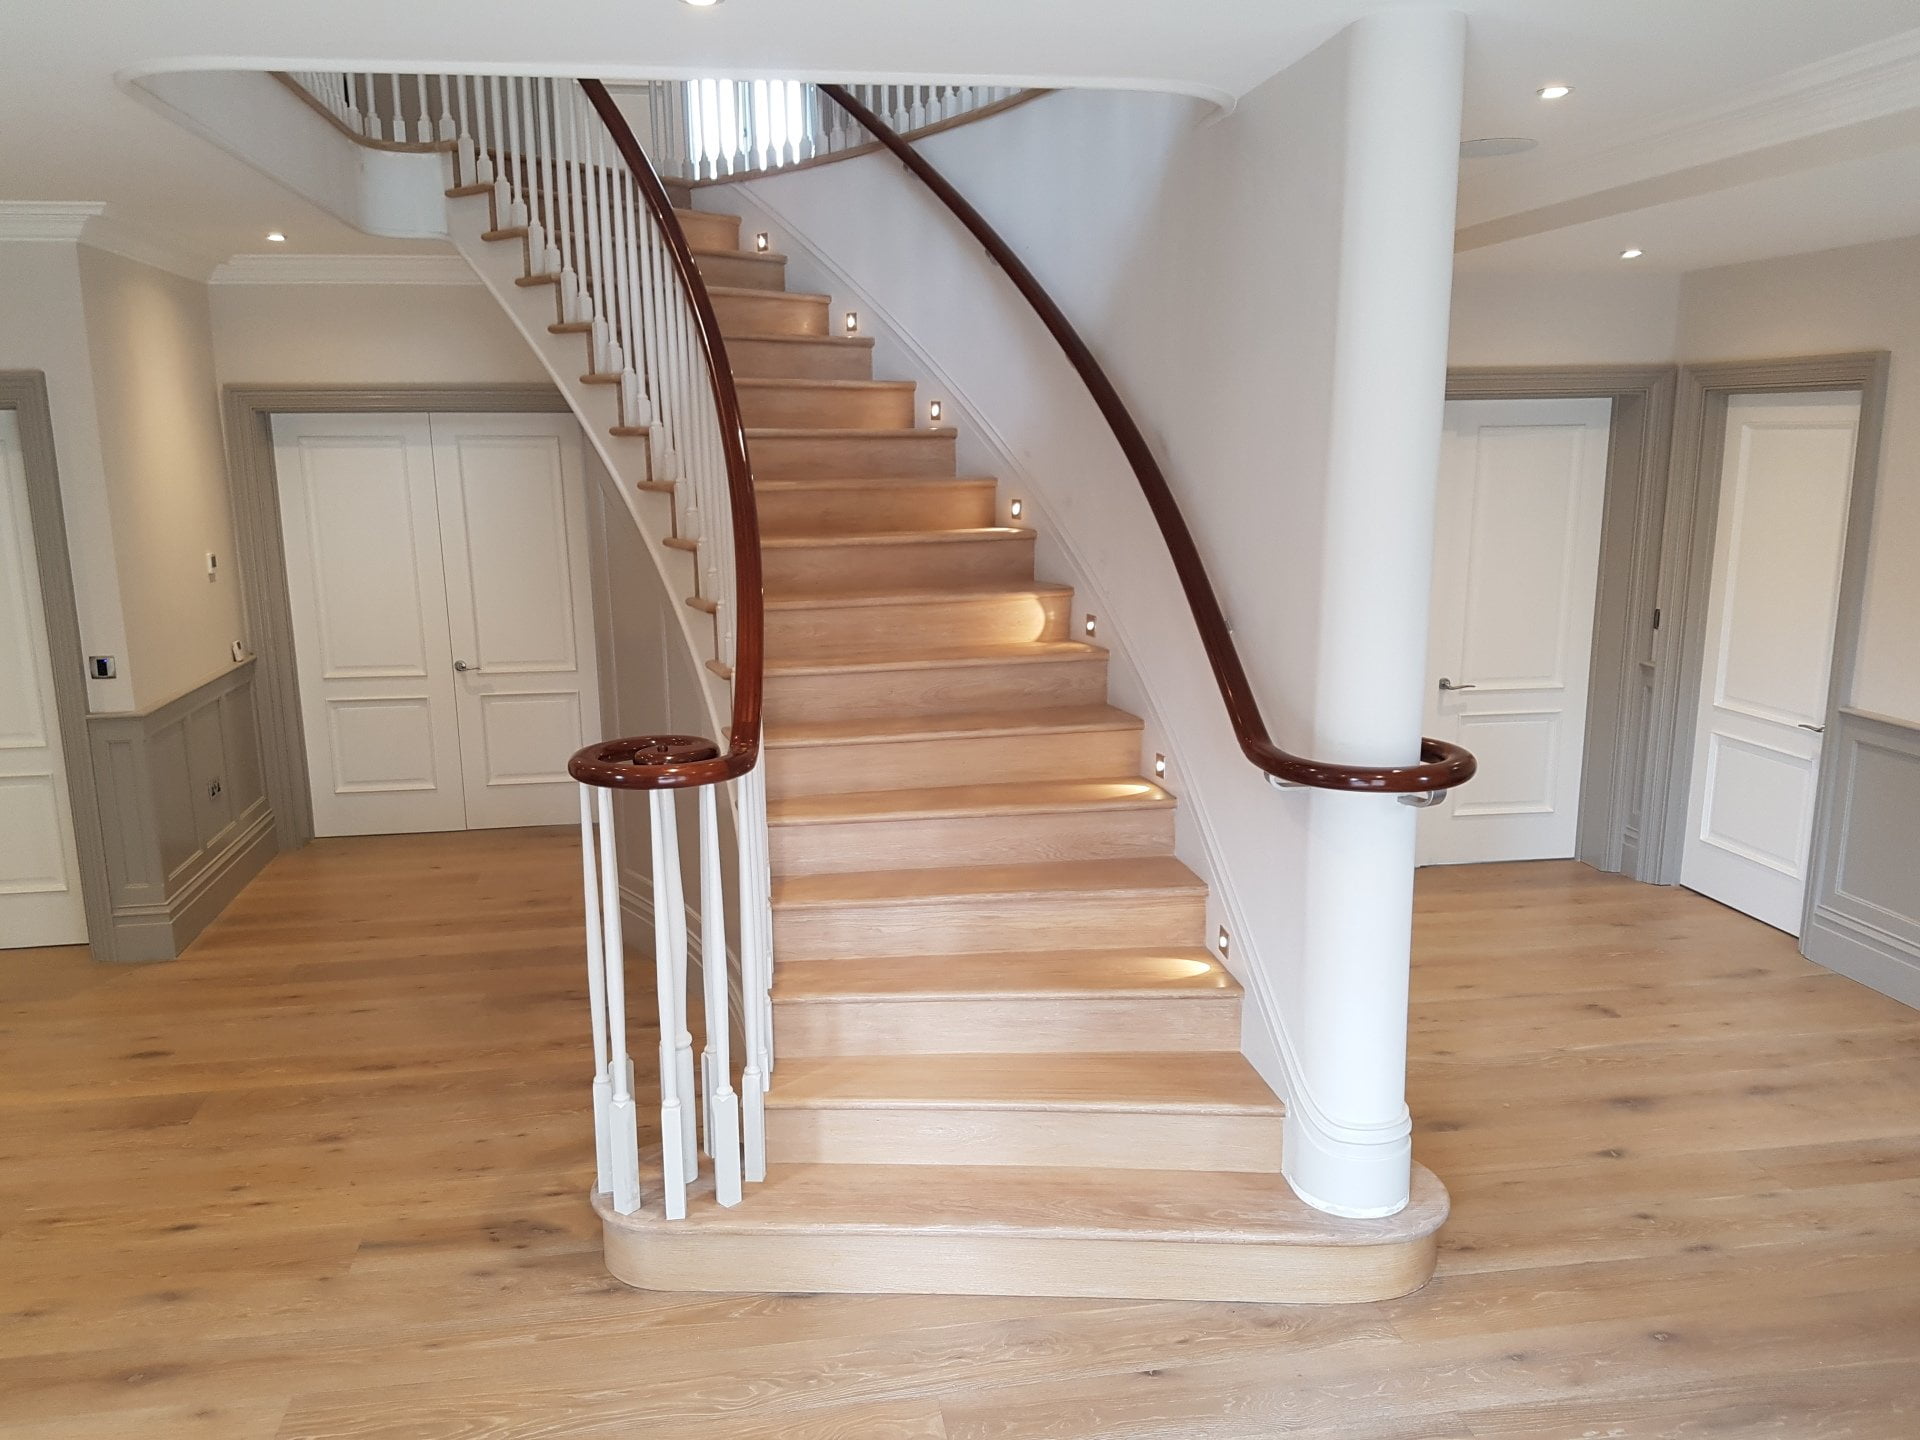 Specialist white paint effect to match new oak floor